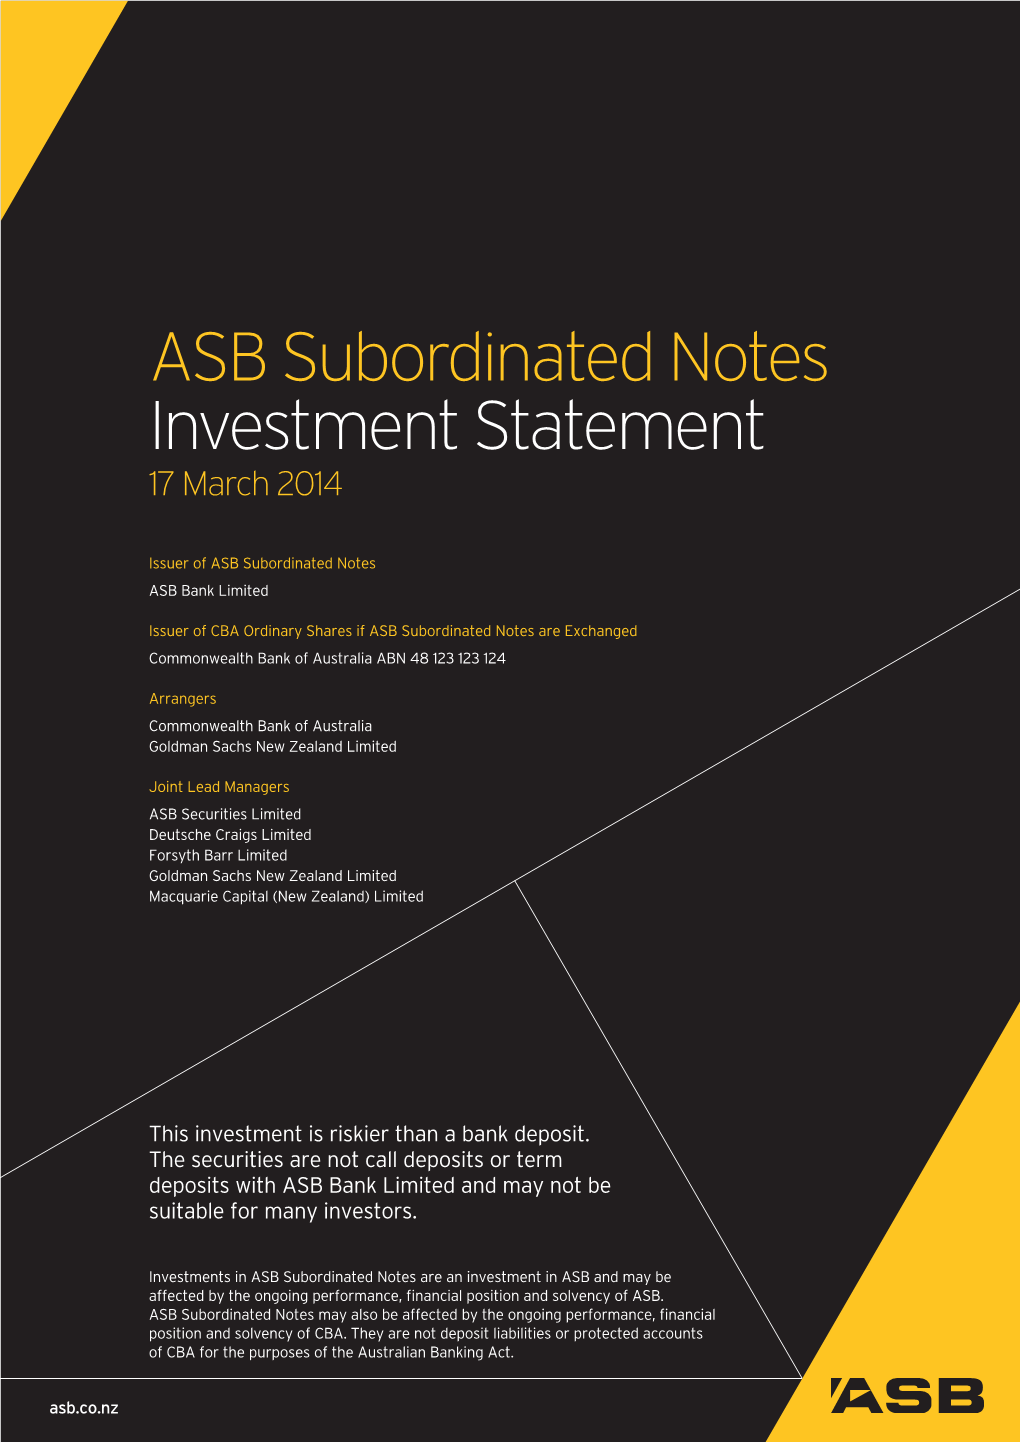 ASB Subordinated Notes Investment Statement 17 March 2014